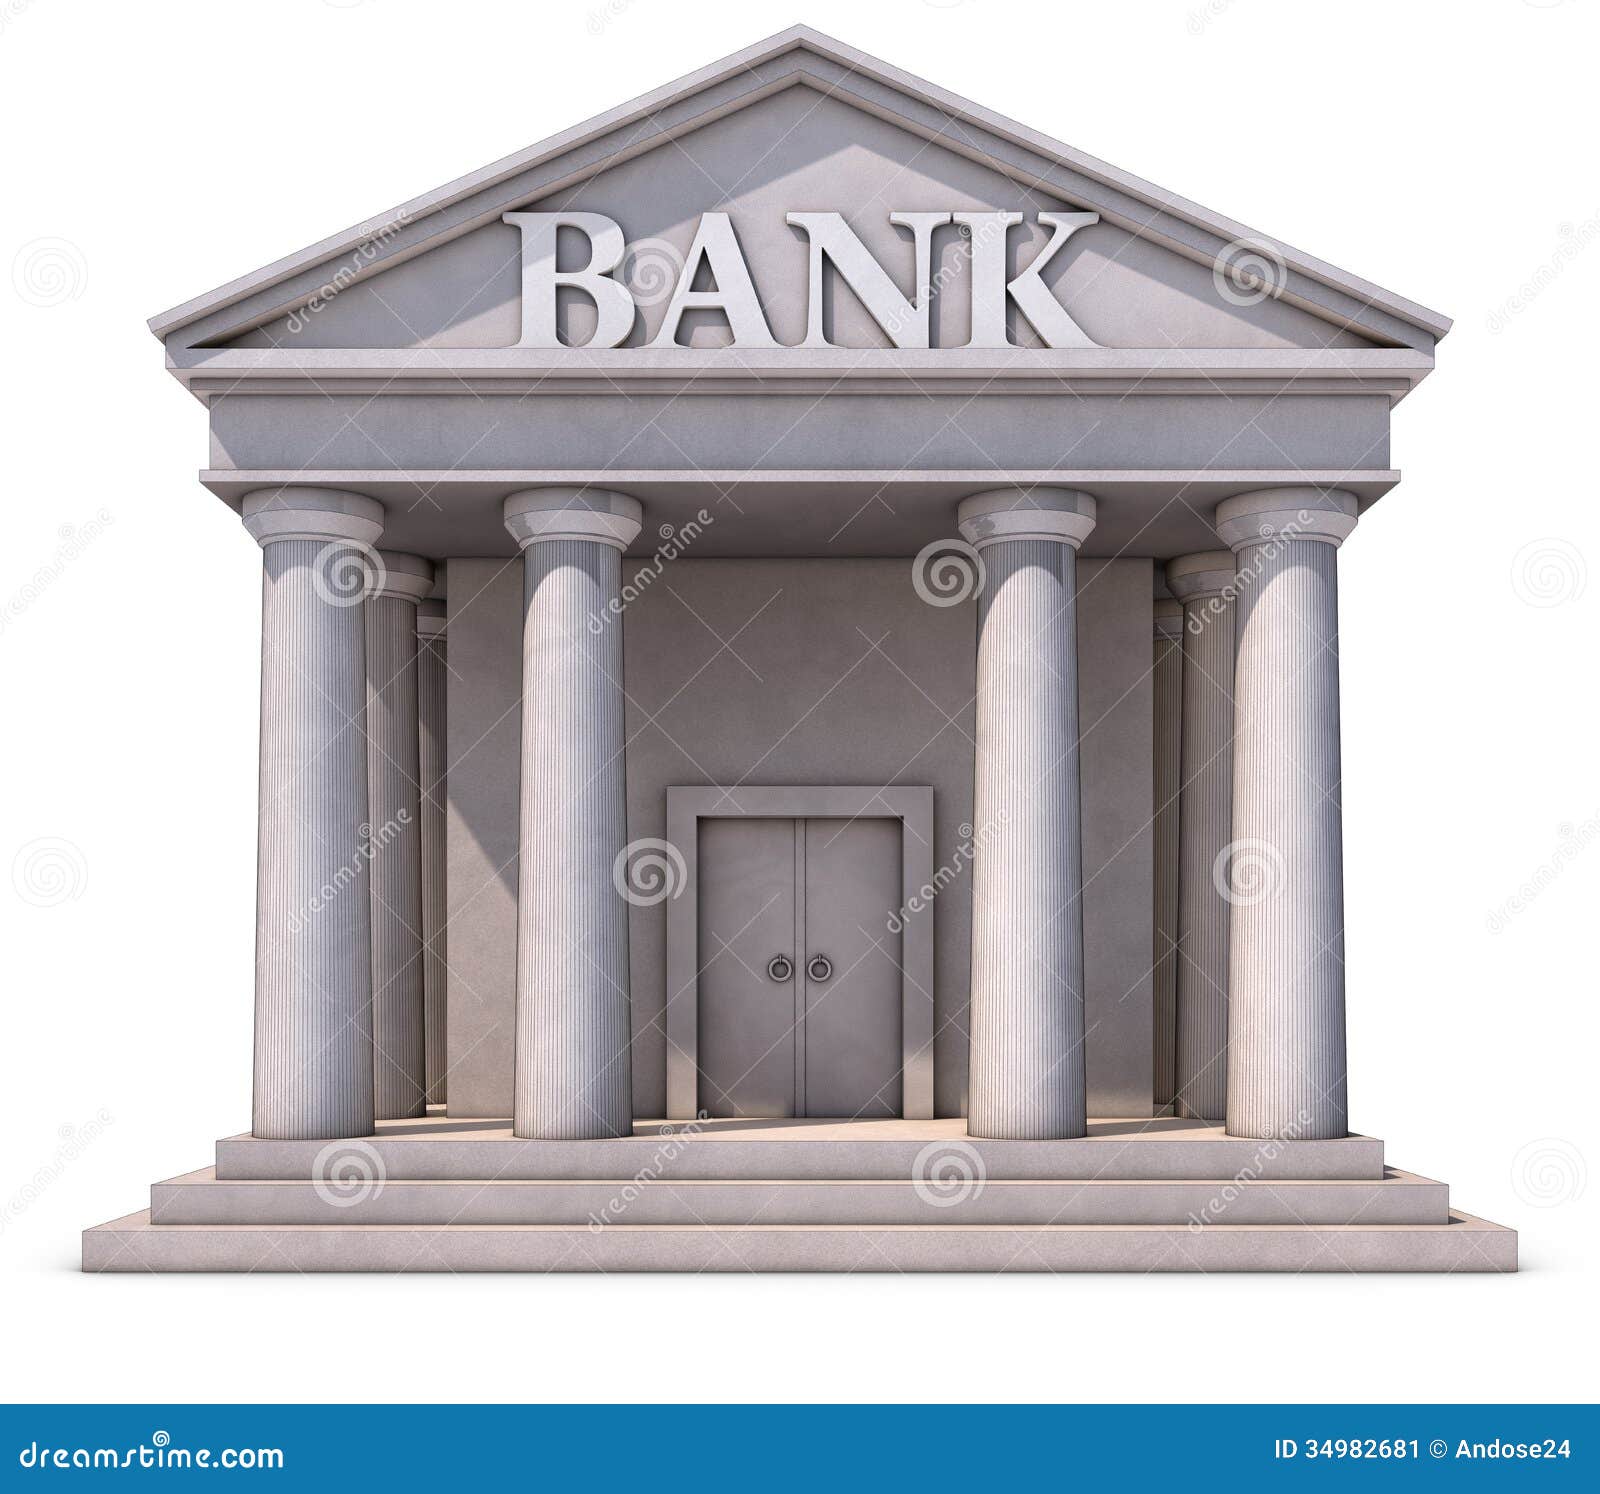 clipart of a bank building - photo #4